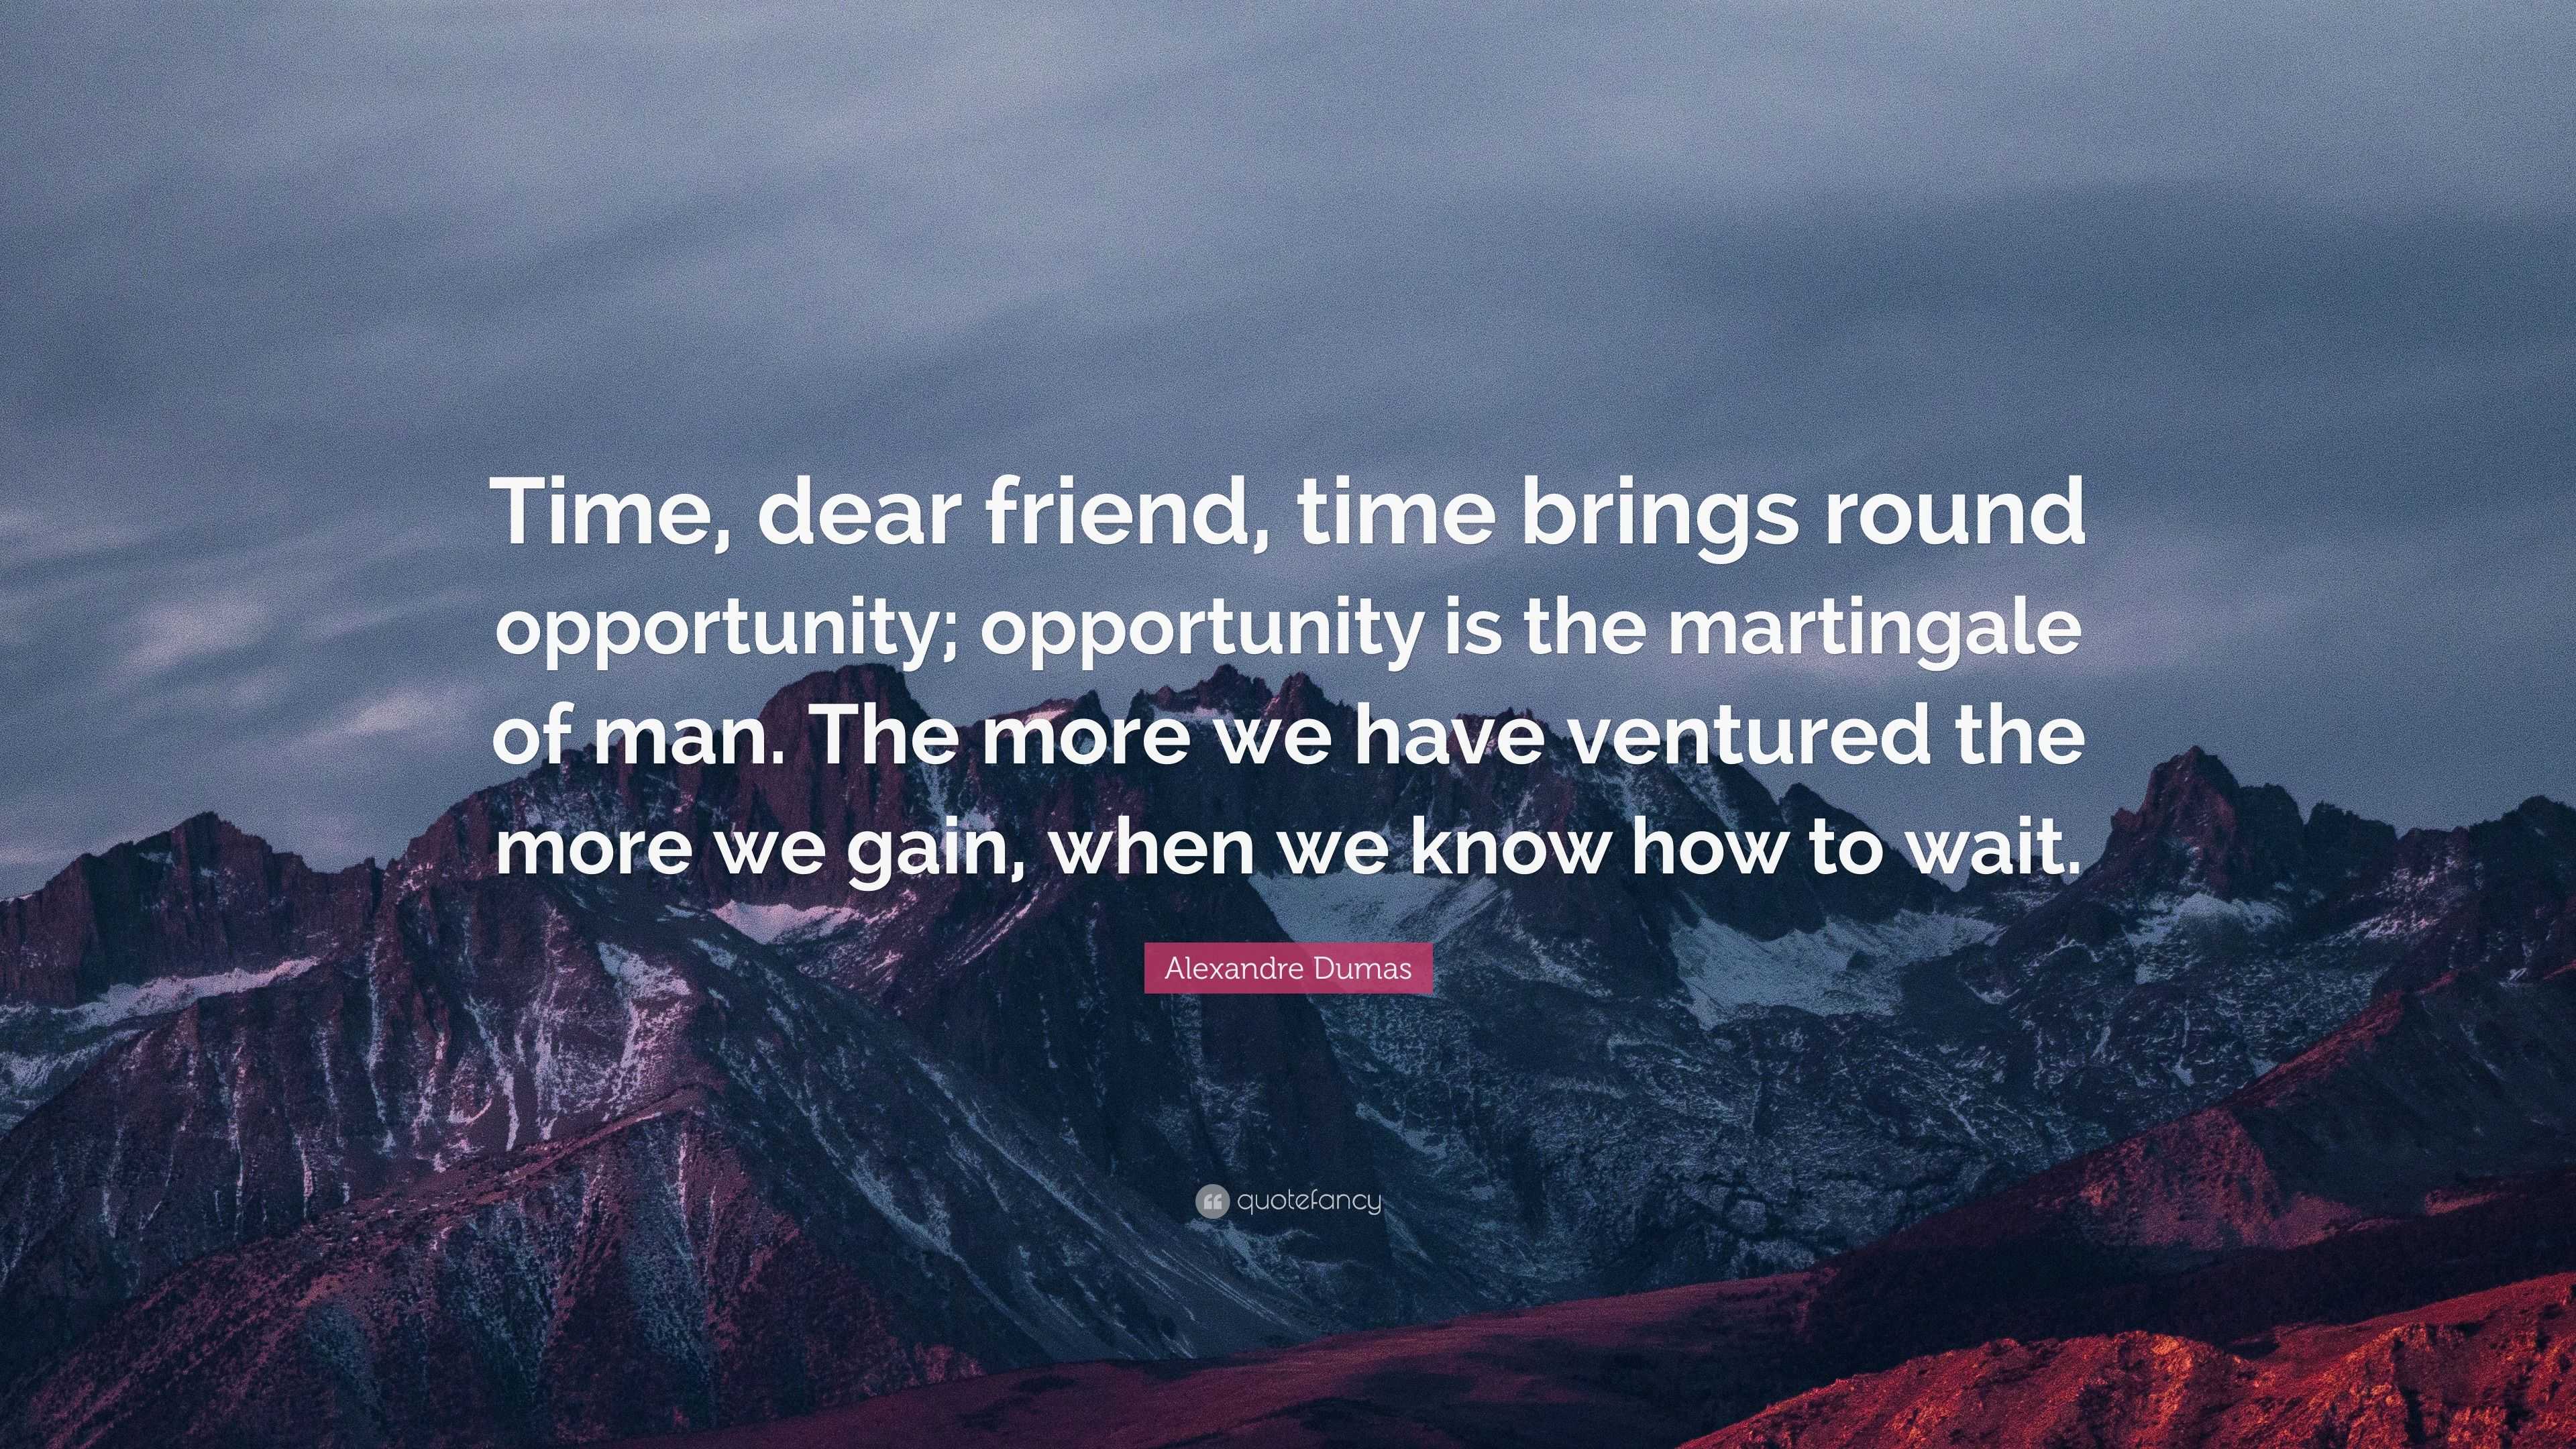 Alexandre Dumas Quote: “Time, dear friend, time brings round ...